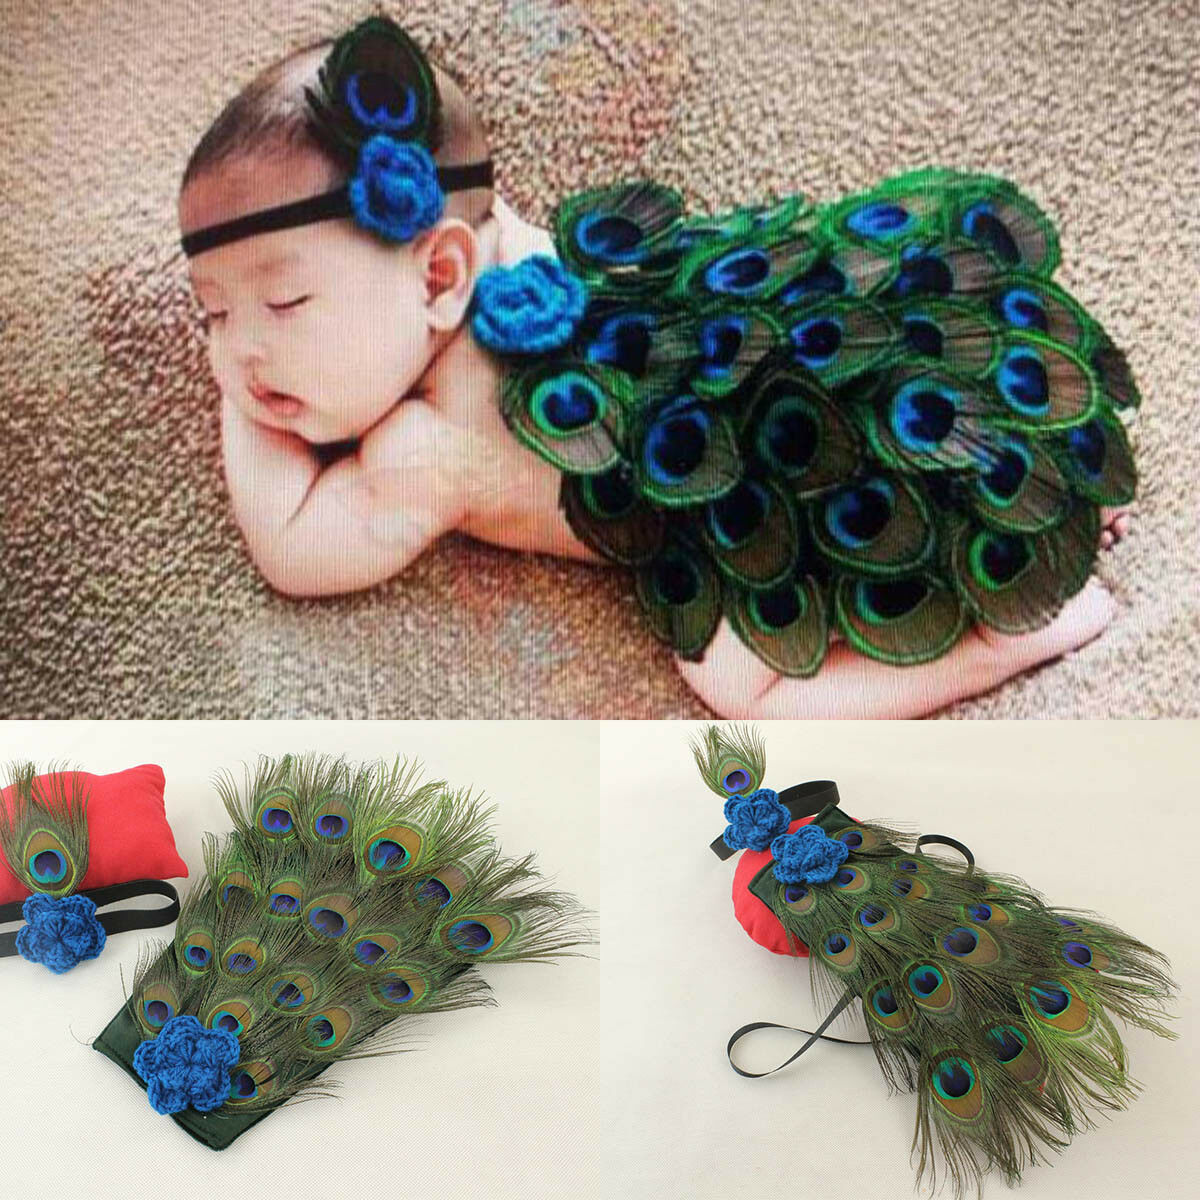 Newborn Baby Girl Boy Peacock Crochet Knit Costume Photo Photography Prop Outfit